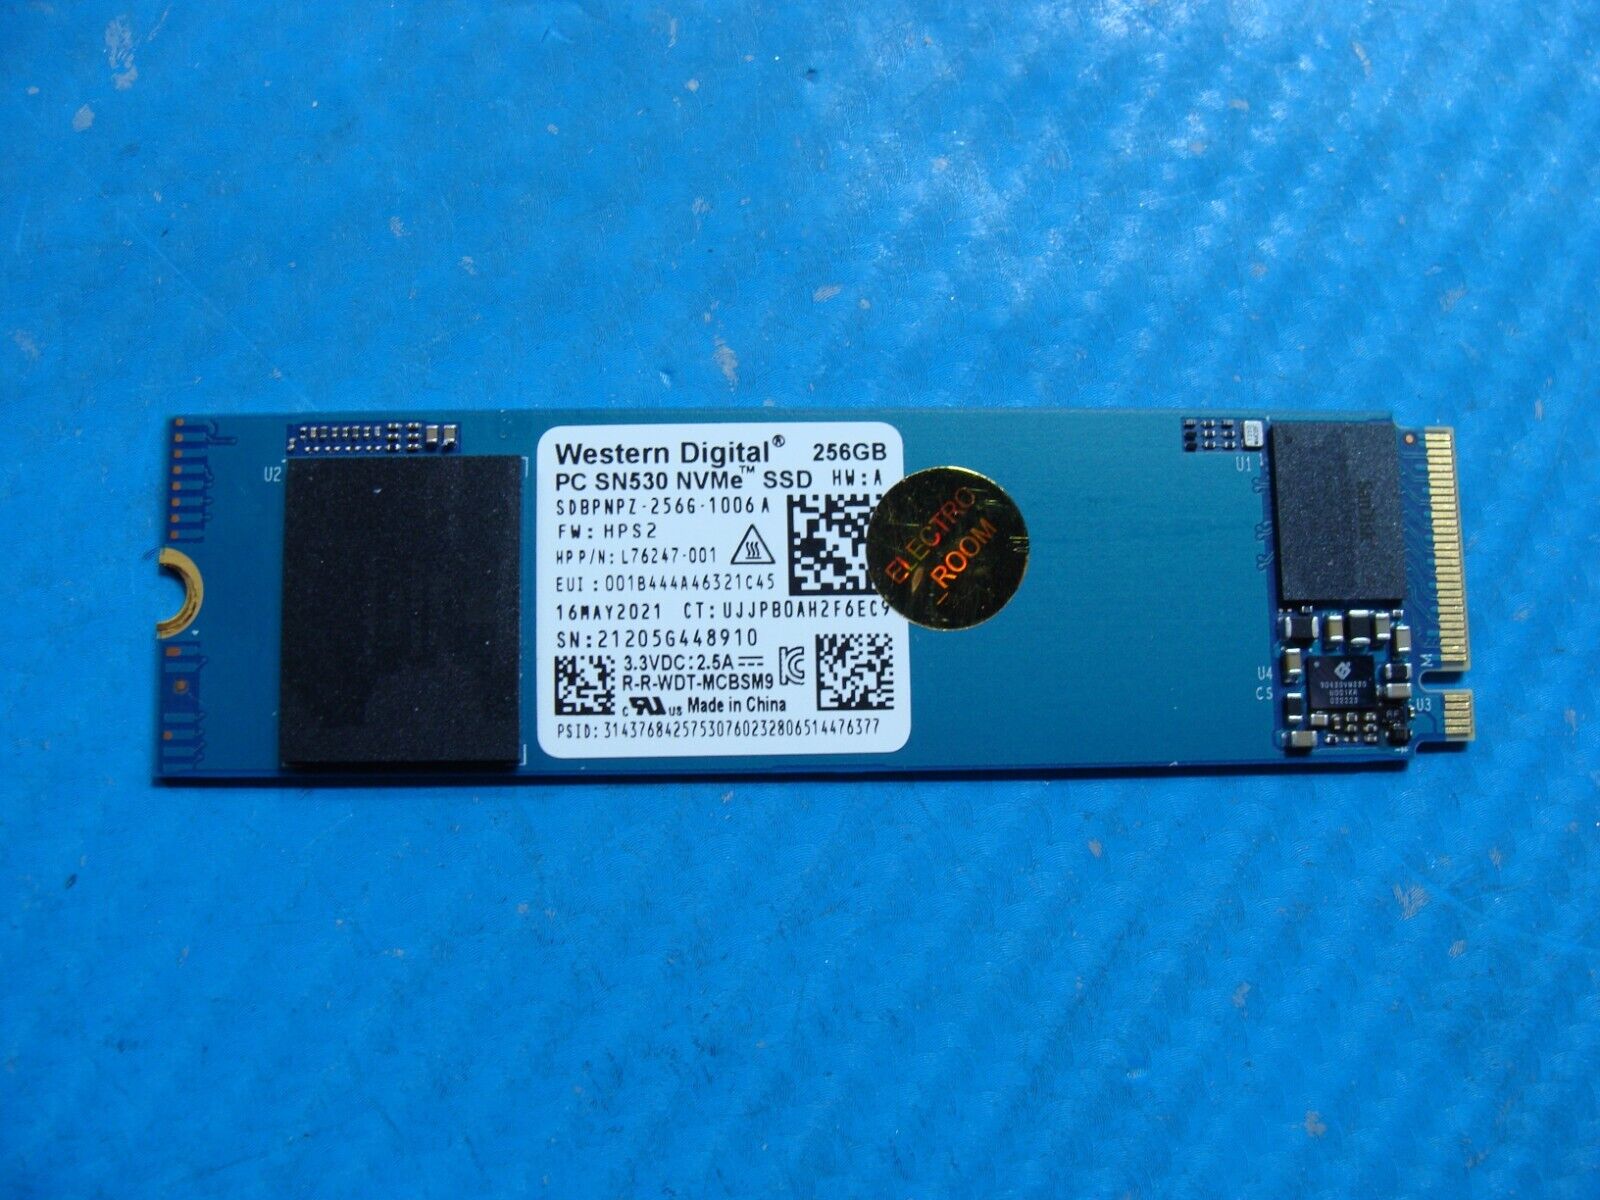 HP 14m-dy0013dx WD 256GB NVMe M.2 SSD Solid State Drive SDBPNPZ-256G-1006A